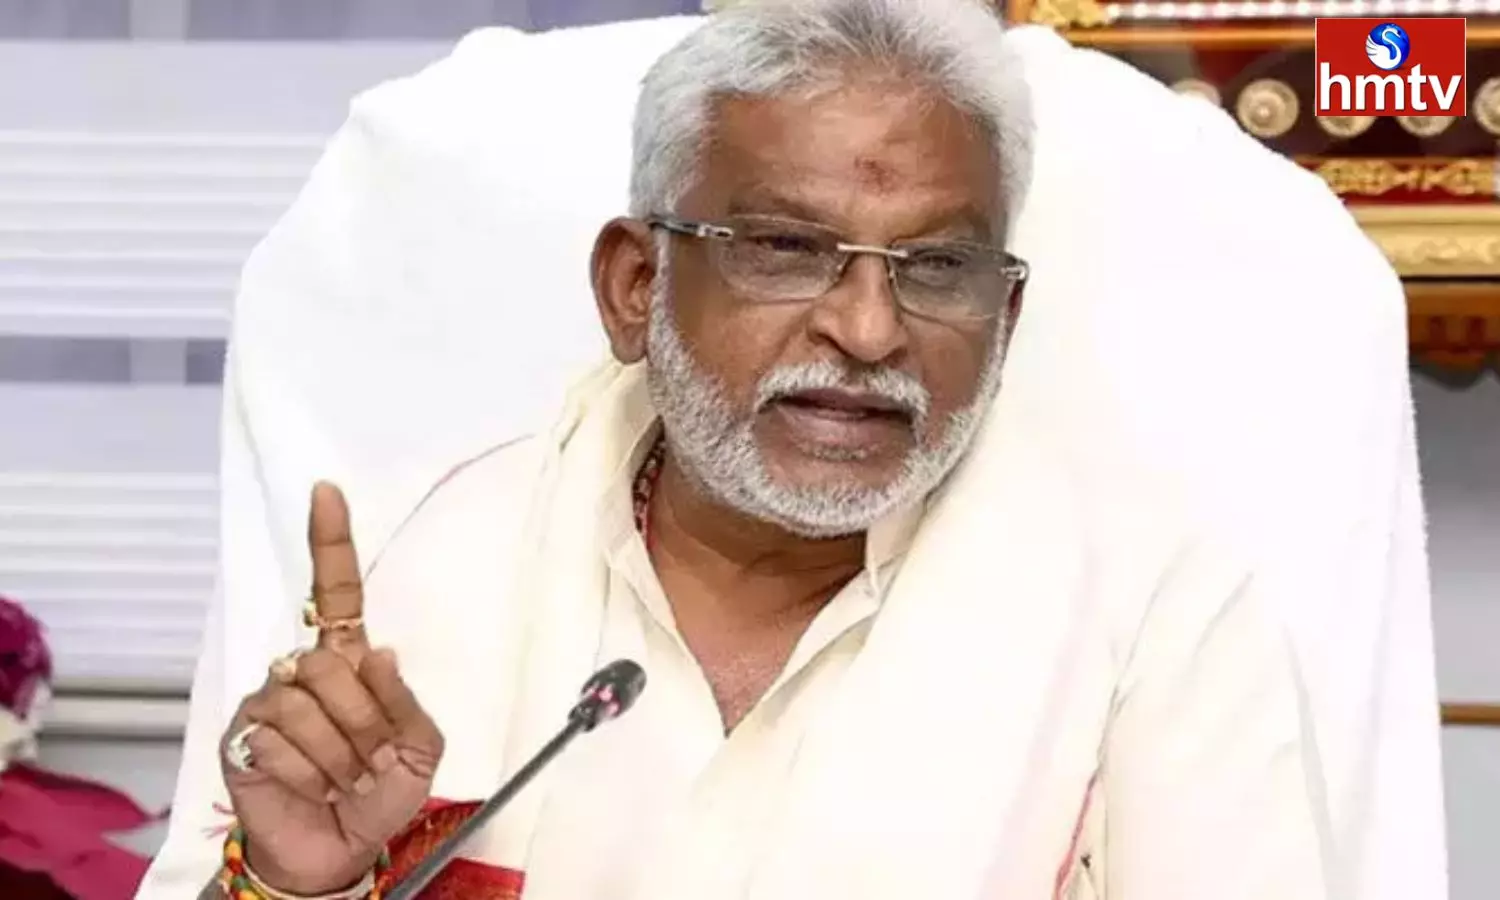 In 2014, The Same Alliance Came To Power And Looted The State  Says Y V Subba Reddy